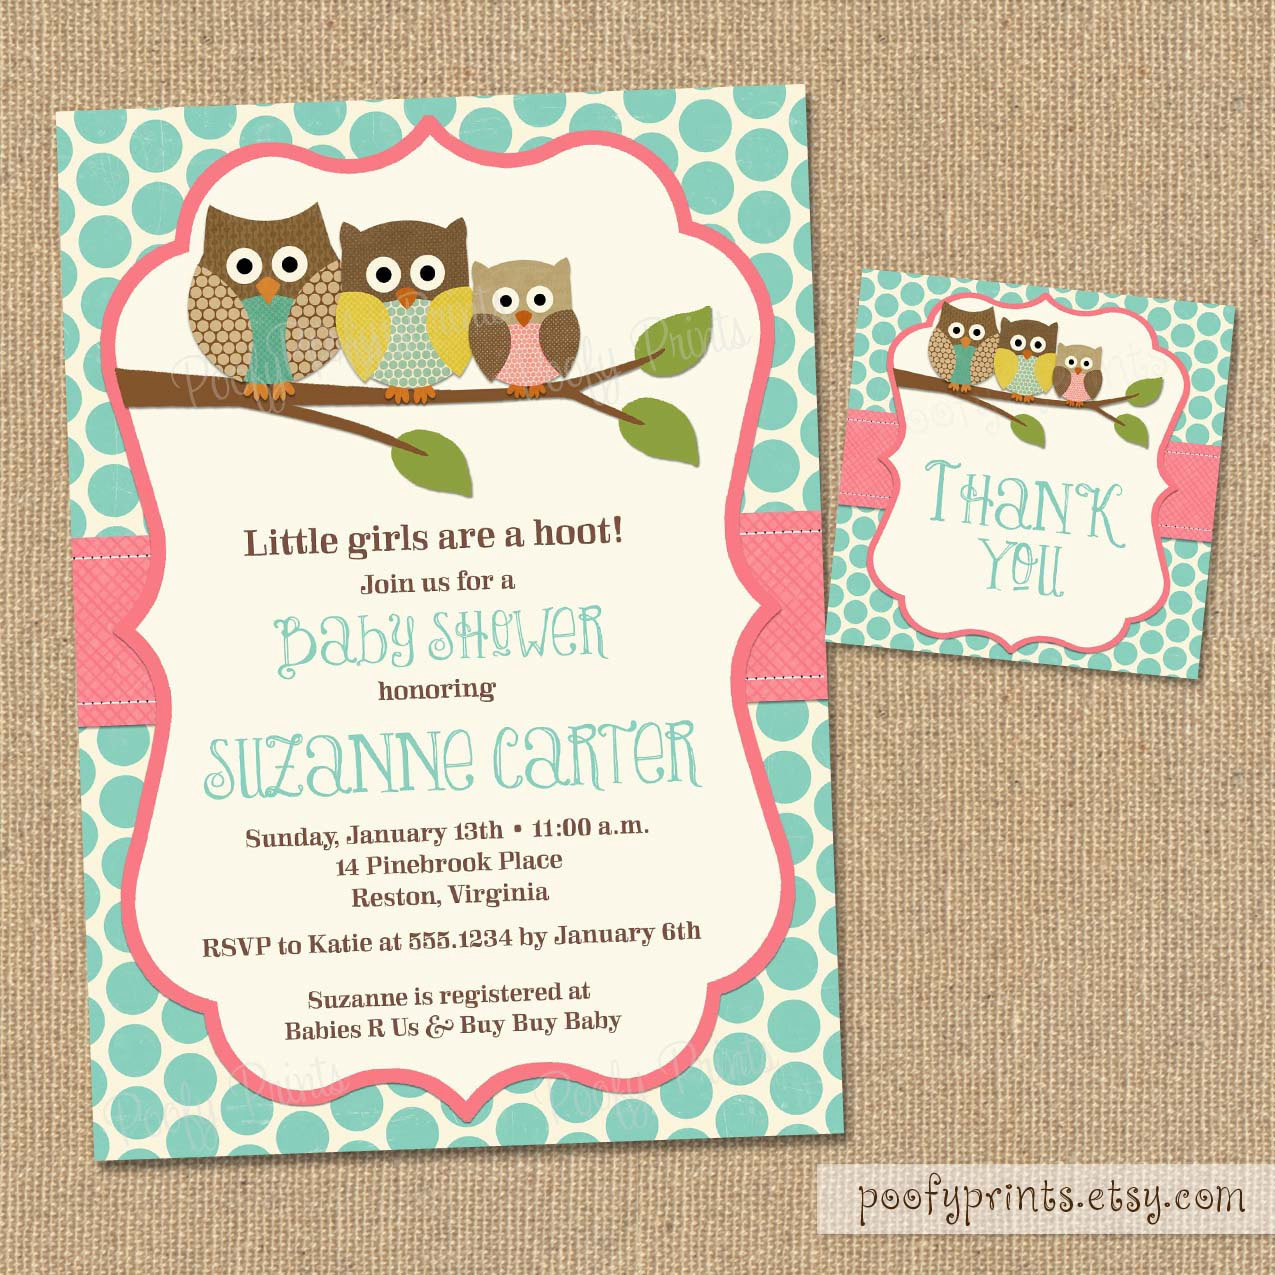 DIY Baby Shower Invitations Template
 Owl Baby Shower Invitations DIY Printable Baby Girl Shower